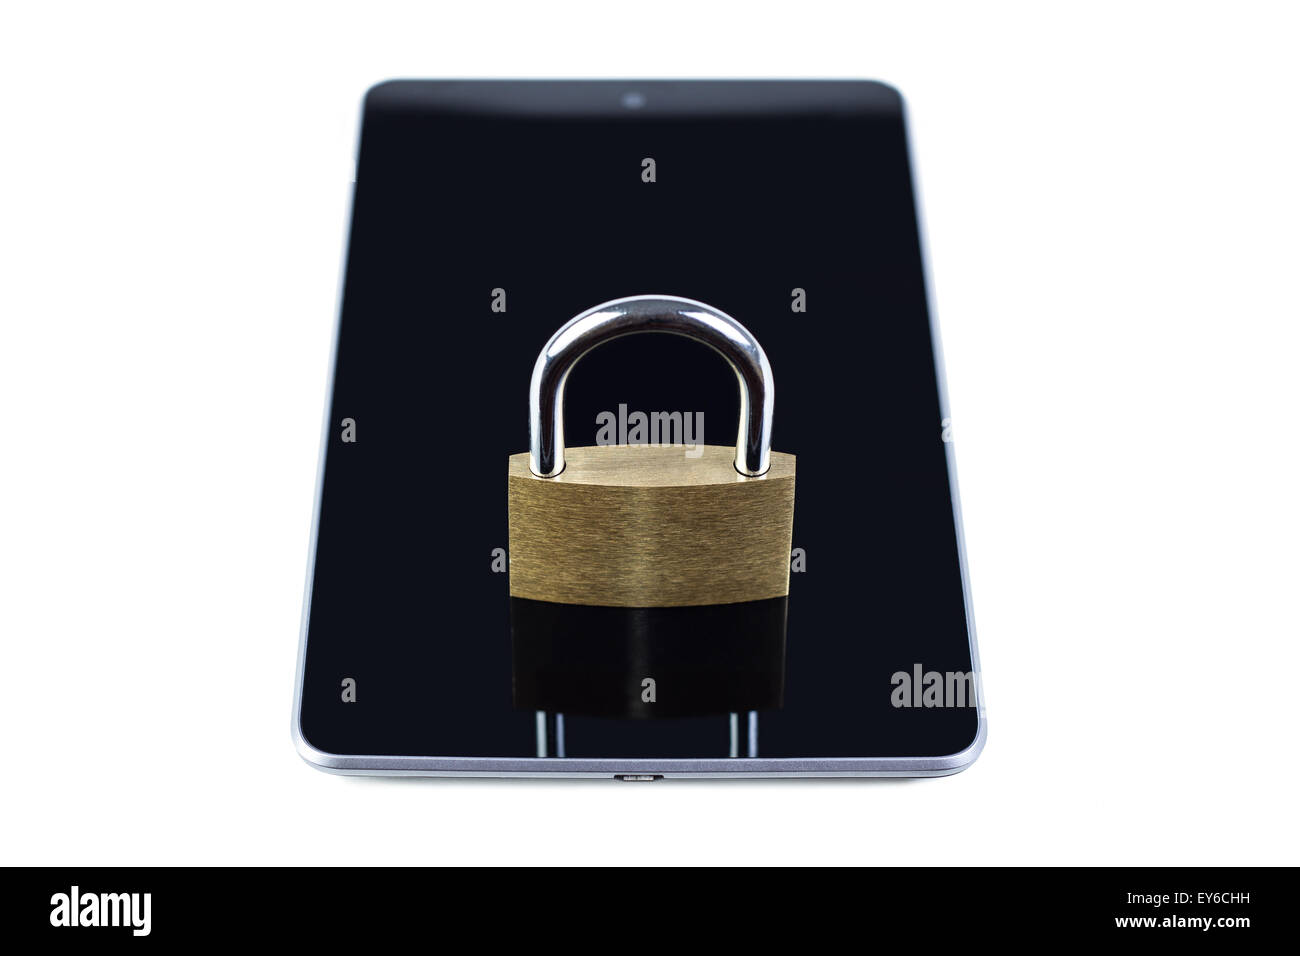 Locked padlock on a tablet computer. Isolated on white background. Concept photo of technology, mobile& tablet computer security Stock Photo